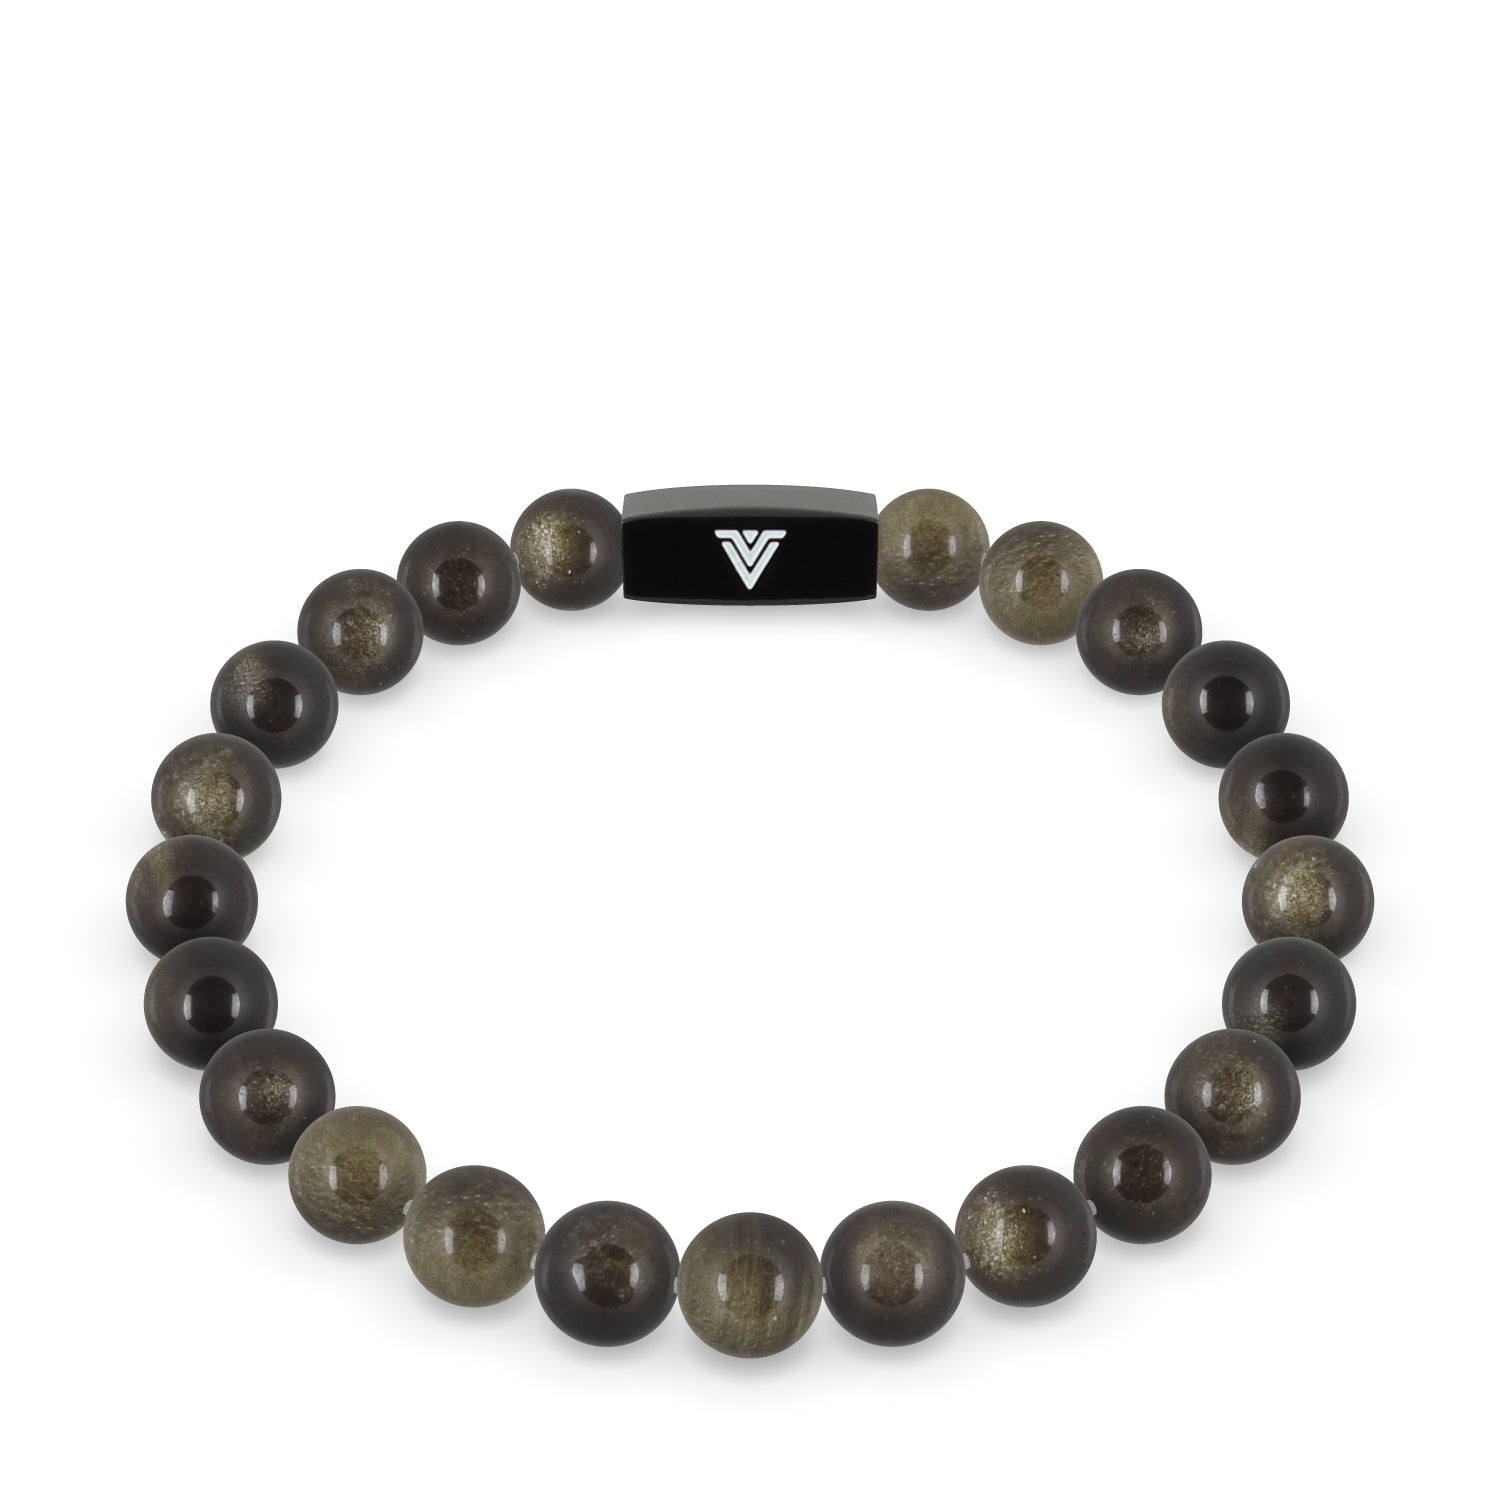 Front view of an 8mm Golden Obsidian crystal beaded stretch bracelet with black stainless steel logo bead made by Voltlin